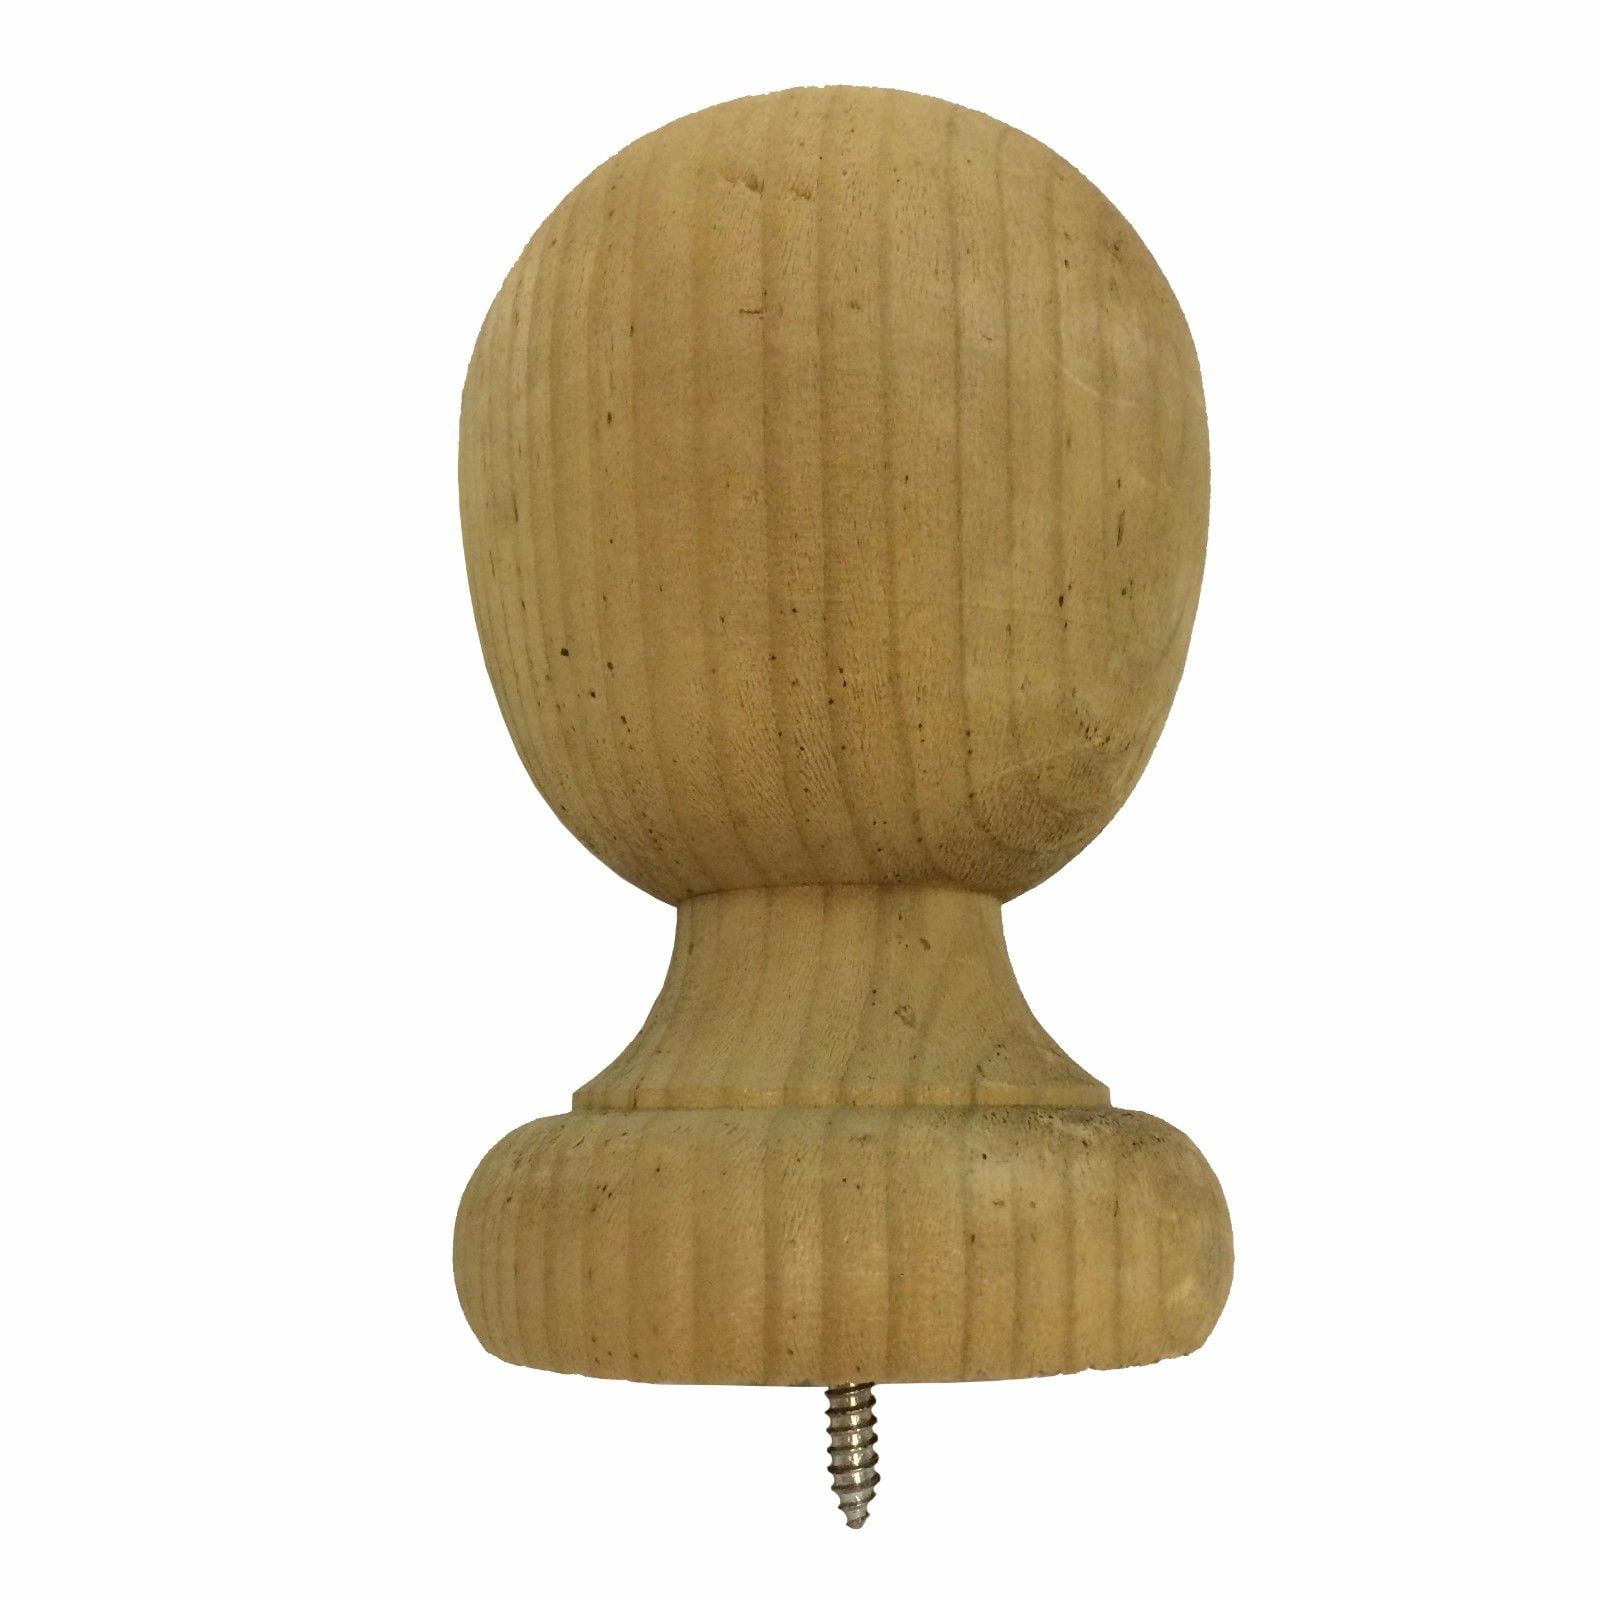 75mm 3/75mm Ball 1 Fence Post + Base to Suit 3 Brown Treated Finial 